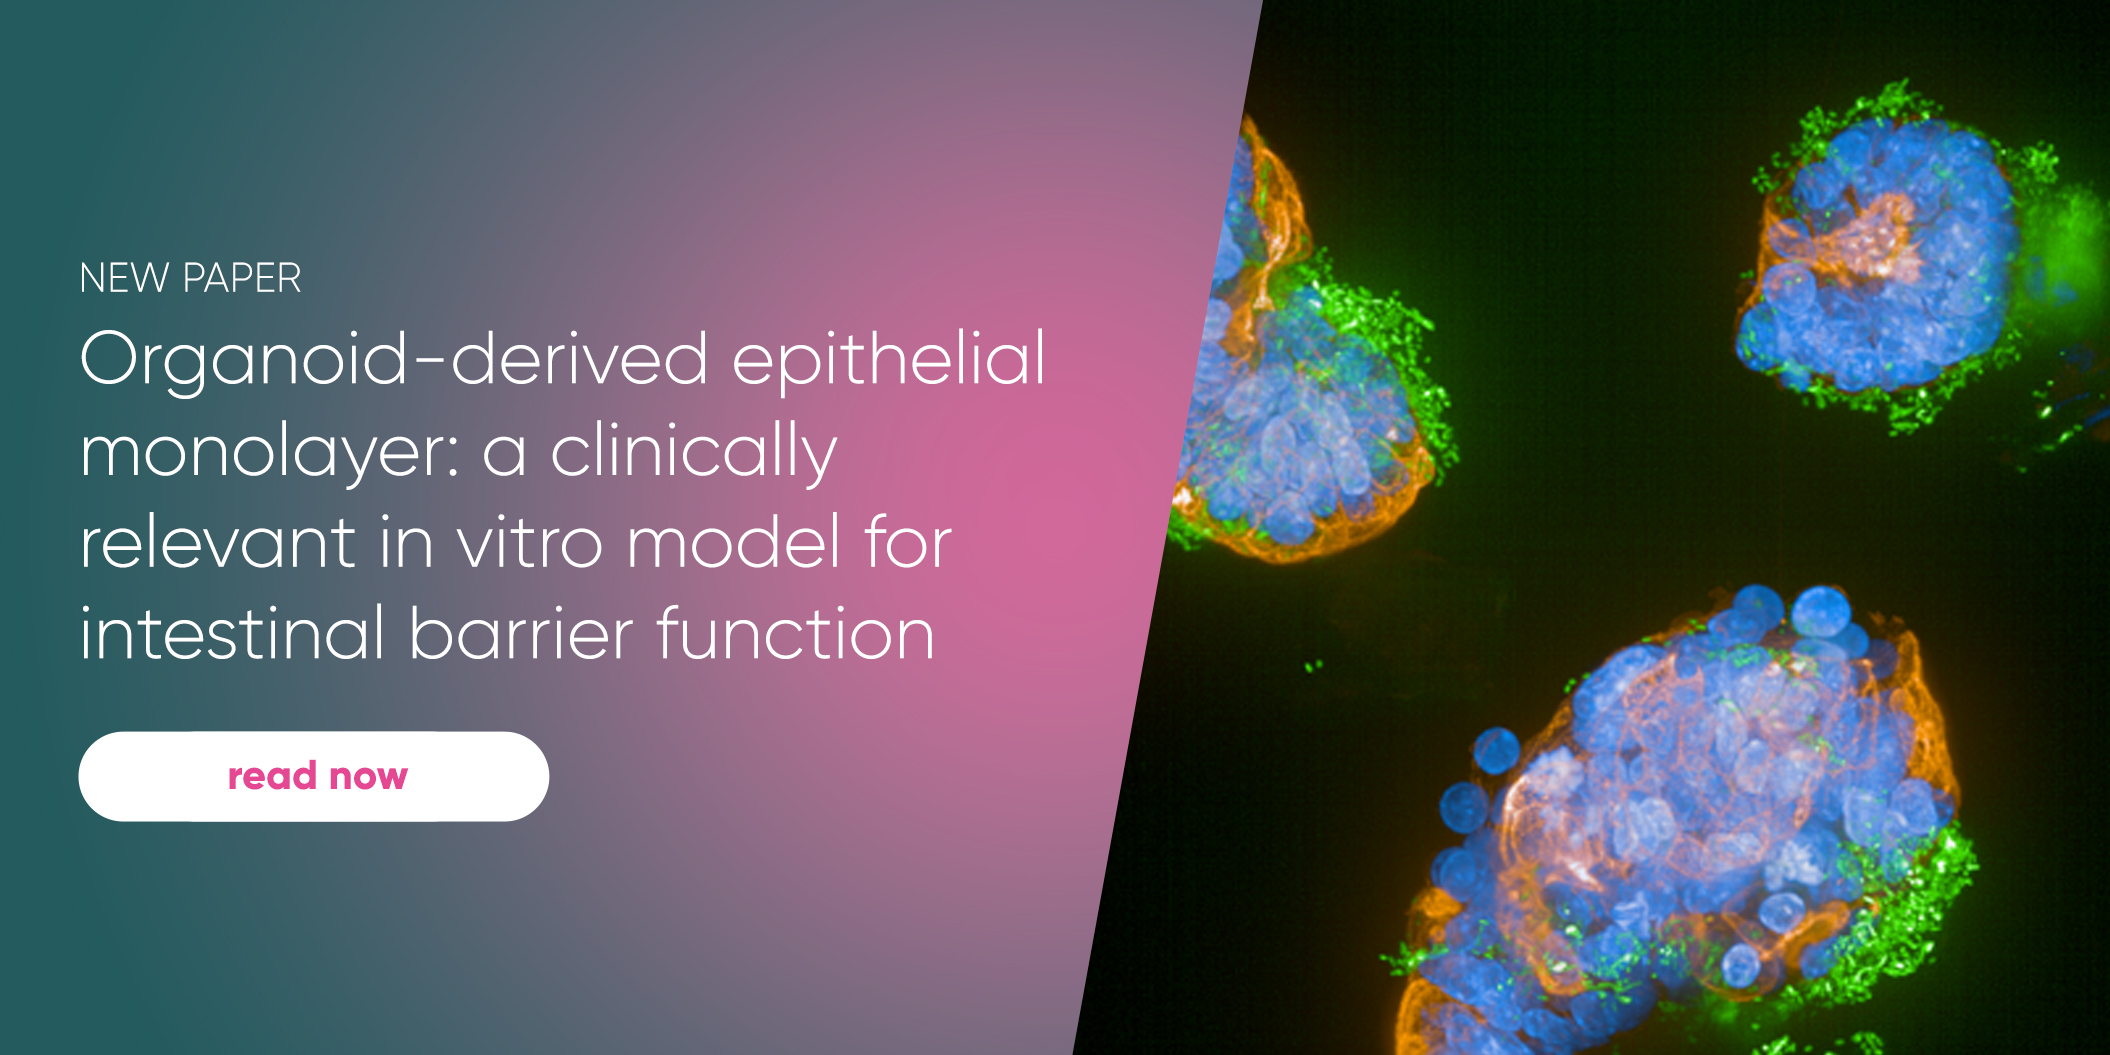 Test epithelial barrier function